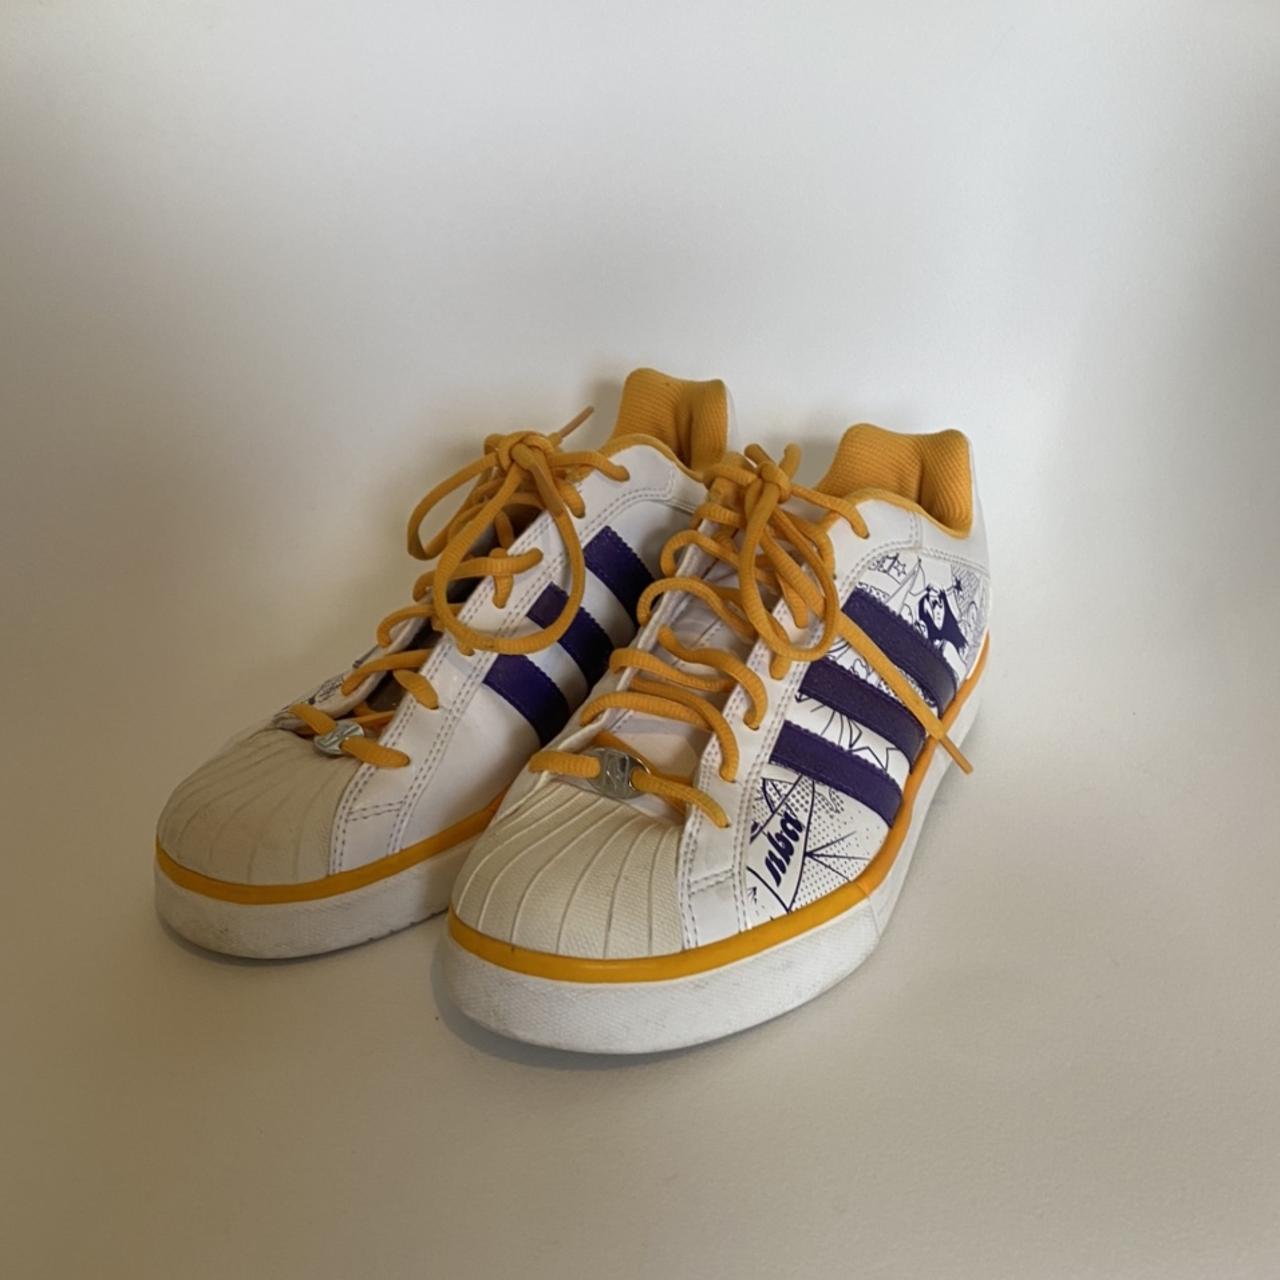 Oprør Ged Tålmodighed ADIDAS LAKERS SHOES These shoes fit an 8.5 men's... - Depop